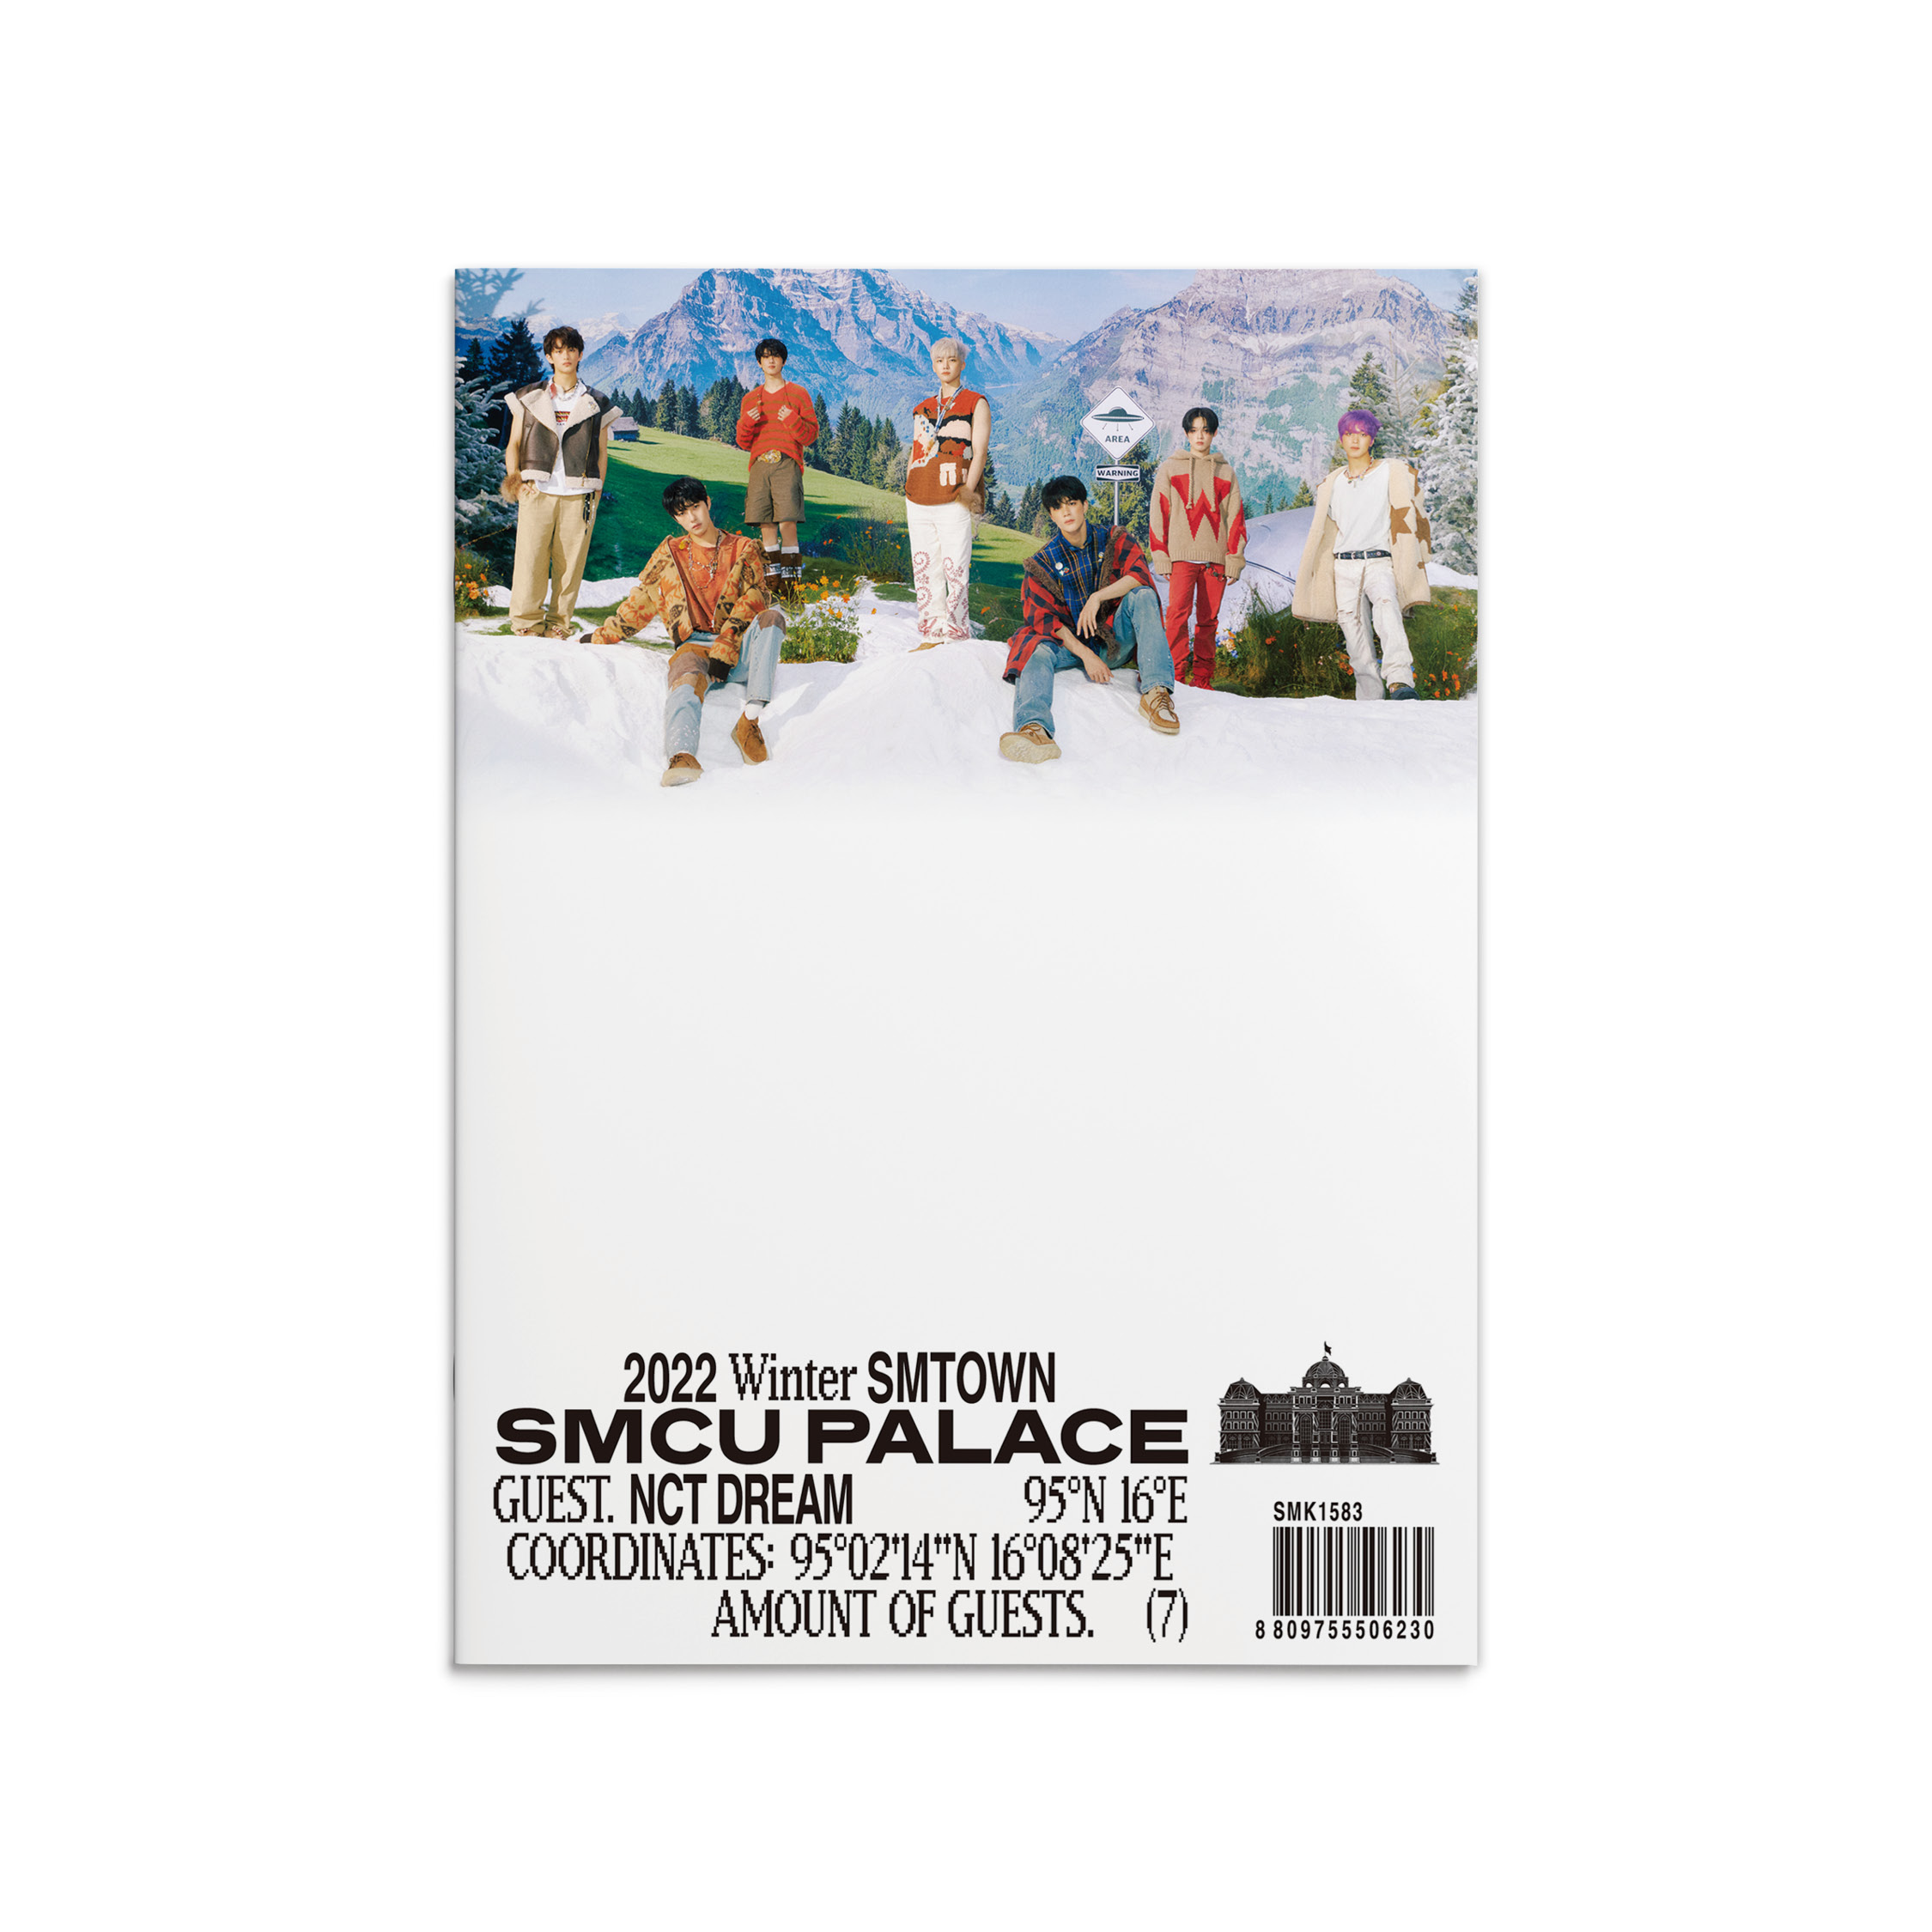 NCT DREAM 2022 Winter SMTOWN : SMCU PALACE (GUEST NCT DREAM)